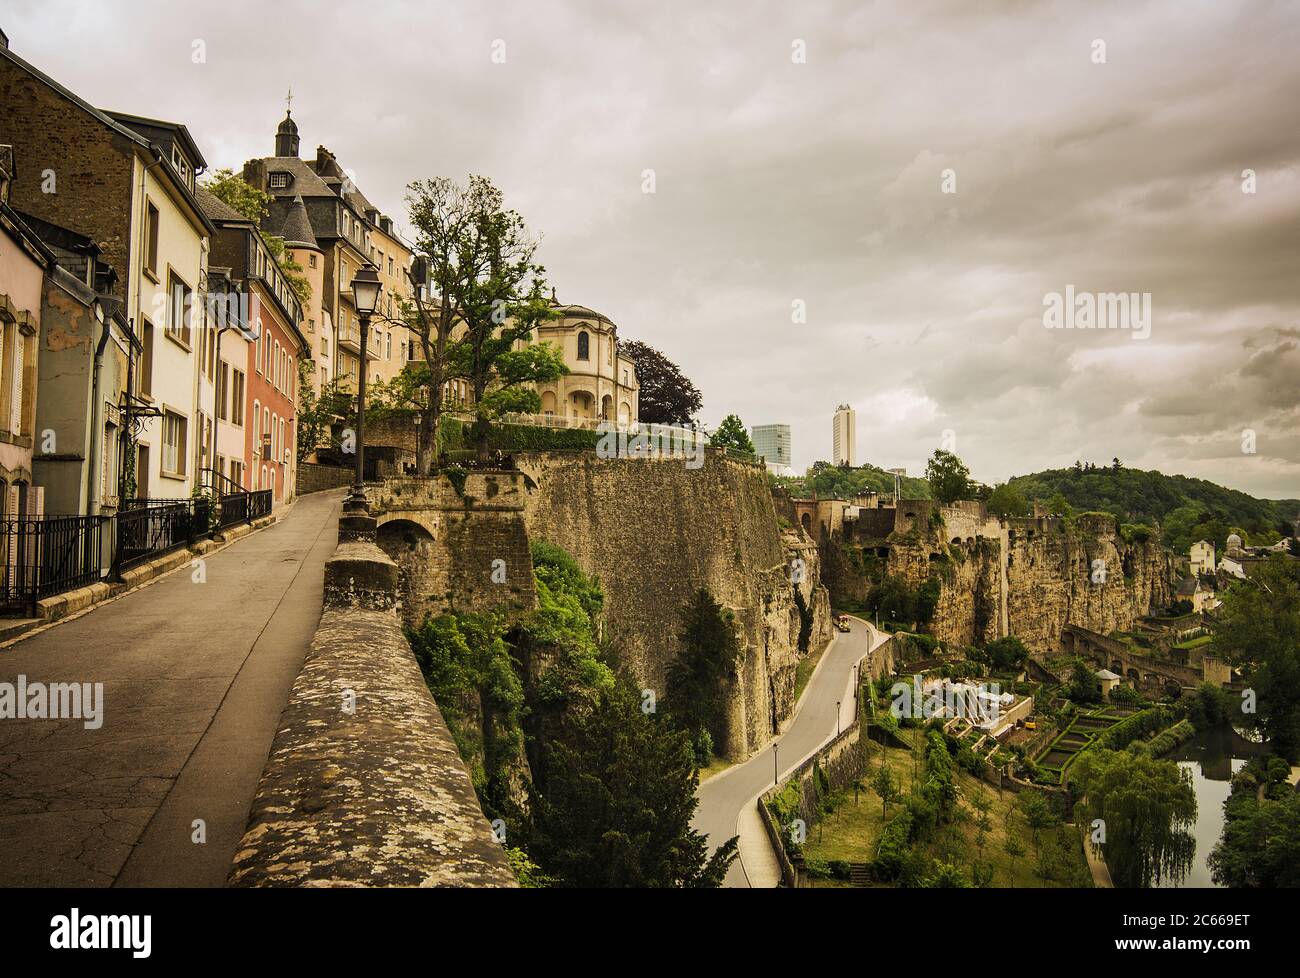 The Petrusse valley, Luxembourg city, Luxembourg, Europe Stock Photo